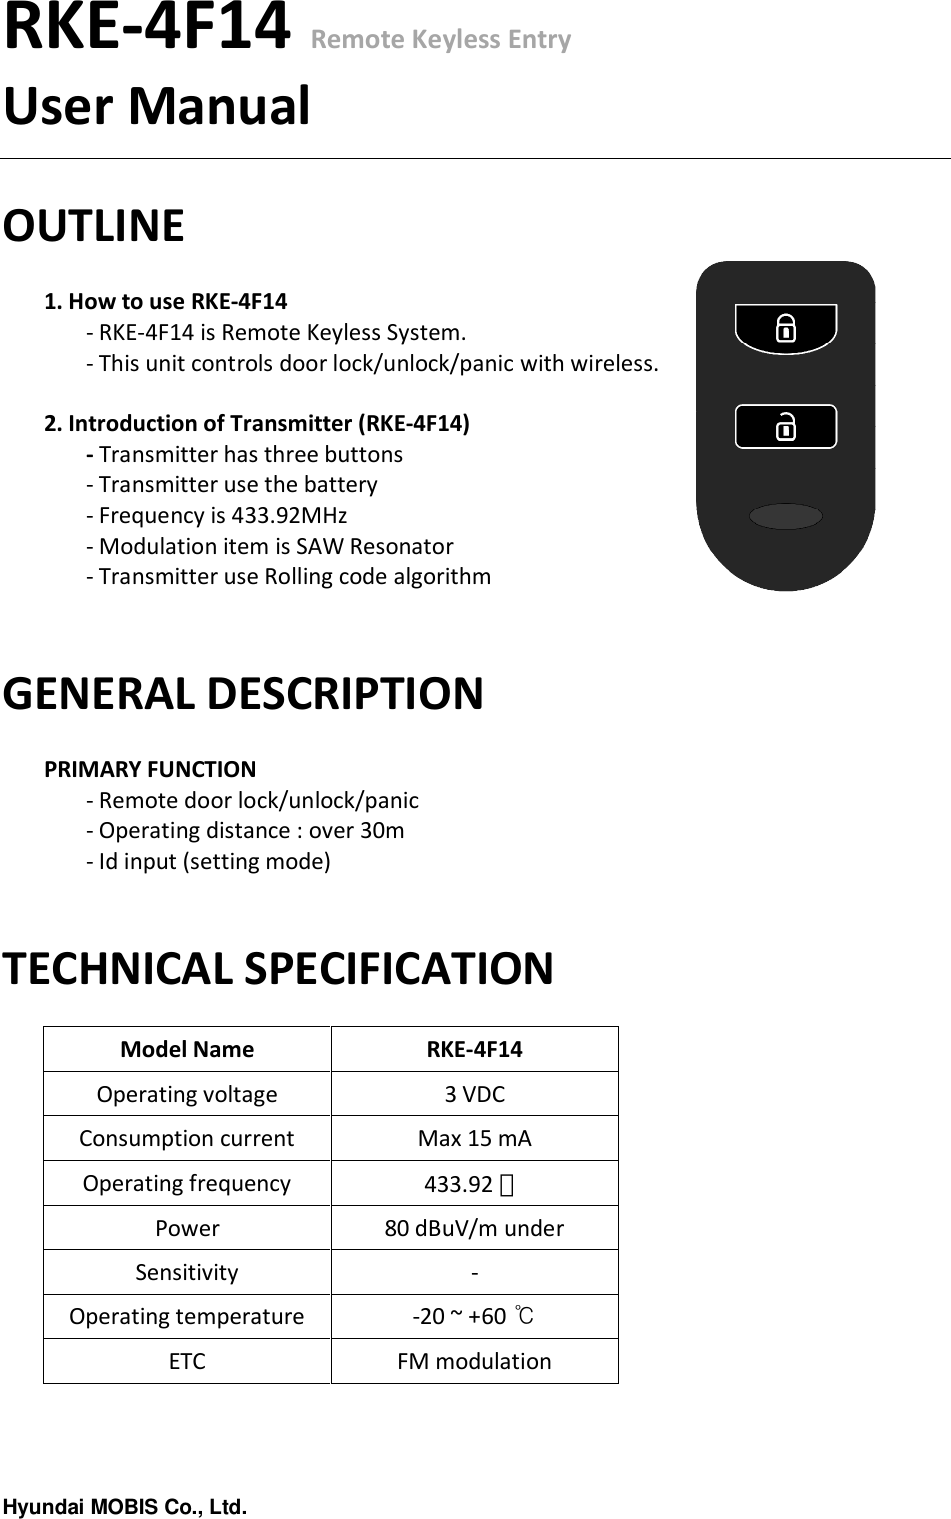 Hyundai MOBIS Co., Ltd.RKE-4F14 Remote Keyless EntryUser ManualOUTLINE1. How to use RKE-4F14- RKE-4F14 is Remote Keyless System.- This unit controls door lock/unlock/panic with wireless.2. Introduction of Transmitter (RKE-4F14)-Transmitter has three buttons- Transmitter use the battery- Frequency is 433.92MHz- Modulation item is SAW Resonator- Transmitter use Rolling code algorithmGENERAL DESCRIPTIONPRIMARY FUNCTION- Remote door lock/unlock/panic- Operating distance : over 30m- Id input (setting mode)TECHNICAL SPECIFICATIONModel Name RKE-4F14Operating voltage 3 VDCConsumption current Max 15 mAOperating frequency 433.92 ㎒Power 80 dBuV/m underSensitivity -Operating temperature -20 ~ +60 ℃ETC FM modulation